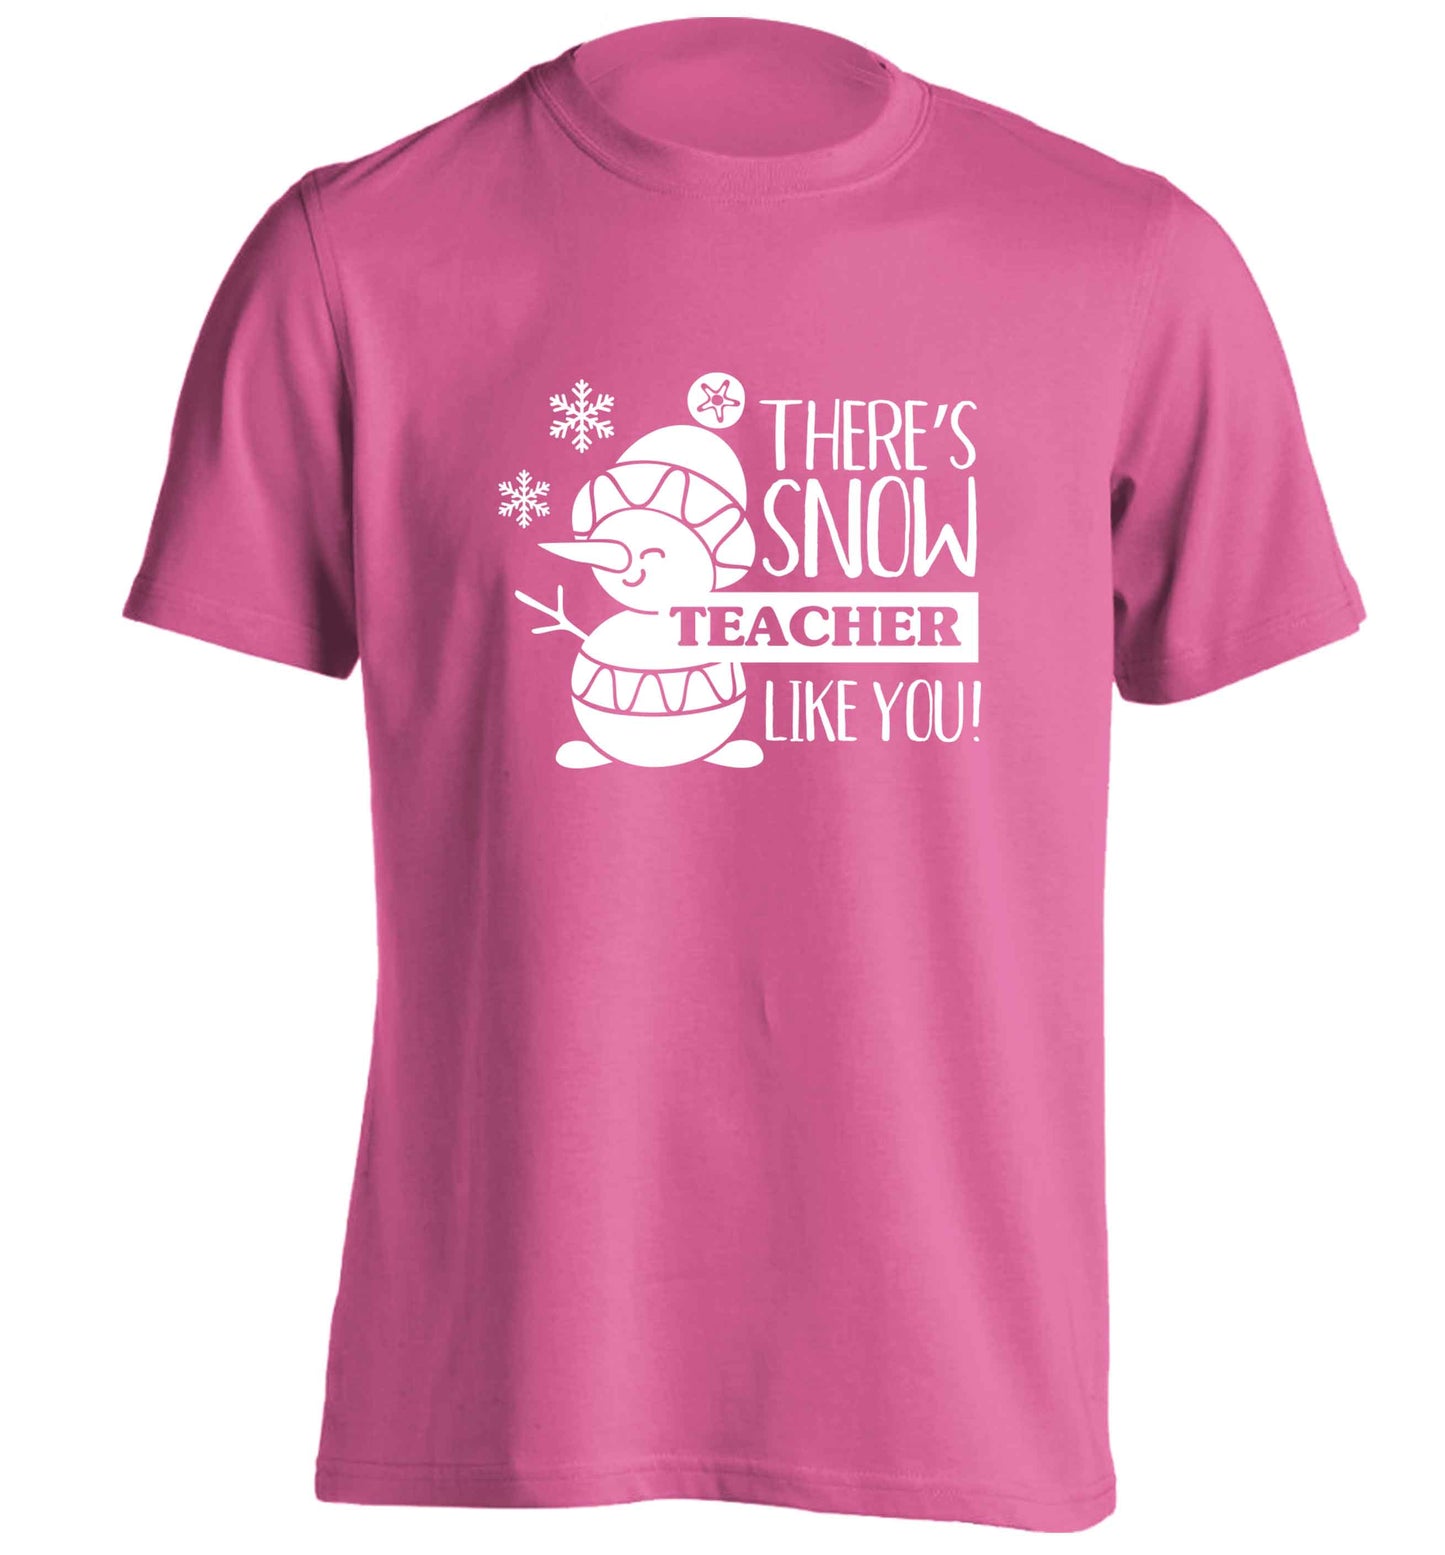 There's snow teacher like you adults unisex pink Tshirt 2XL